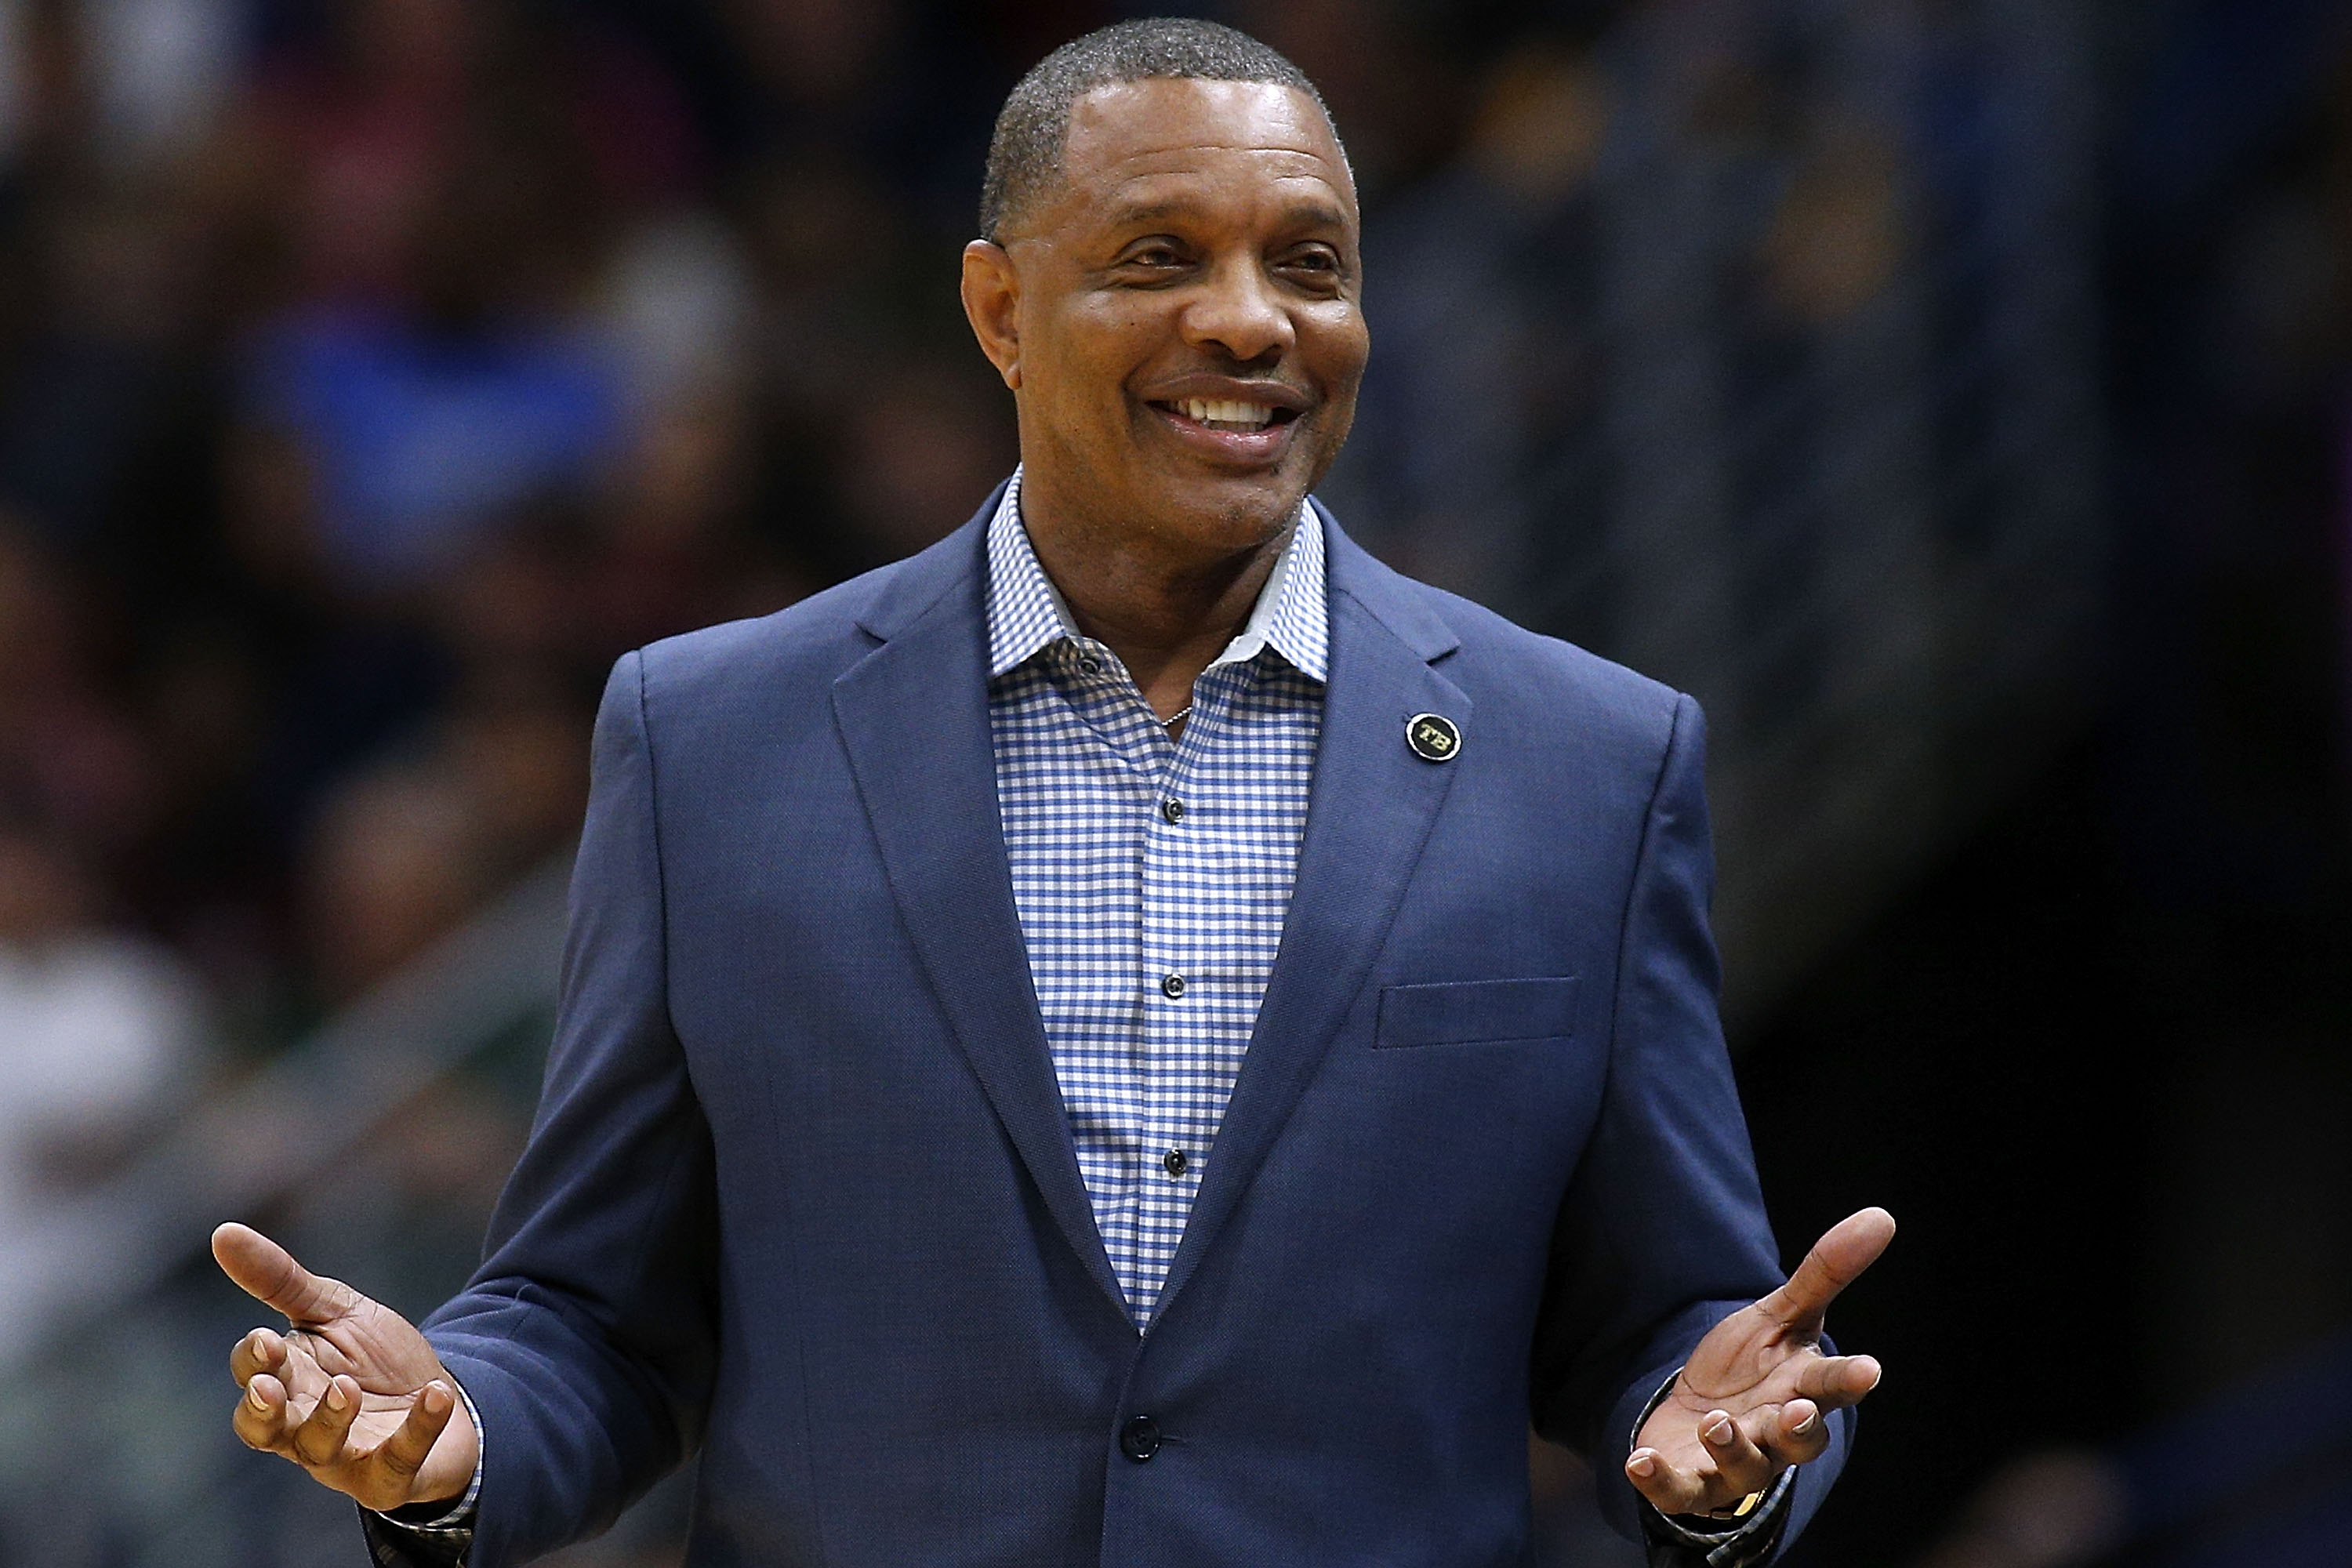 This is a photo of Pelicans coach Alvin Gentry.